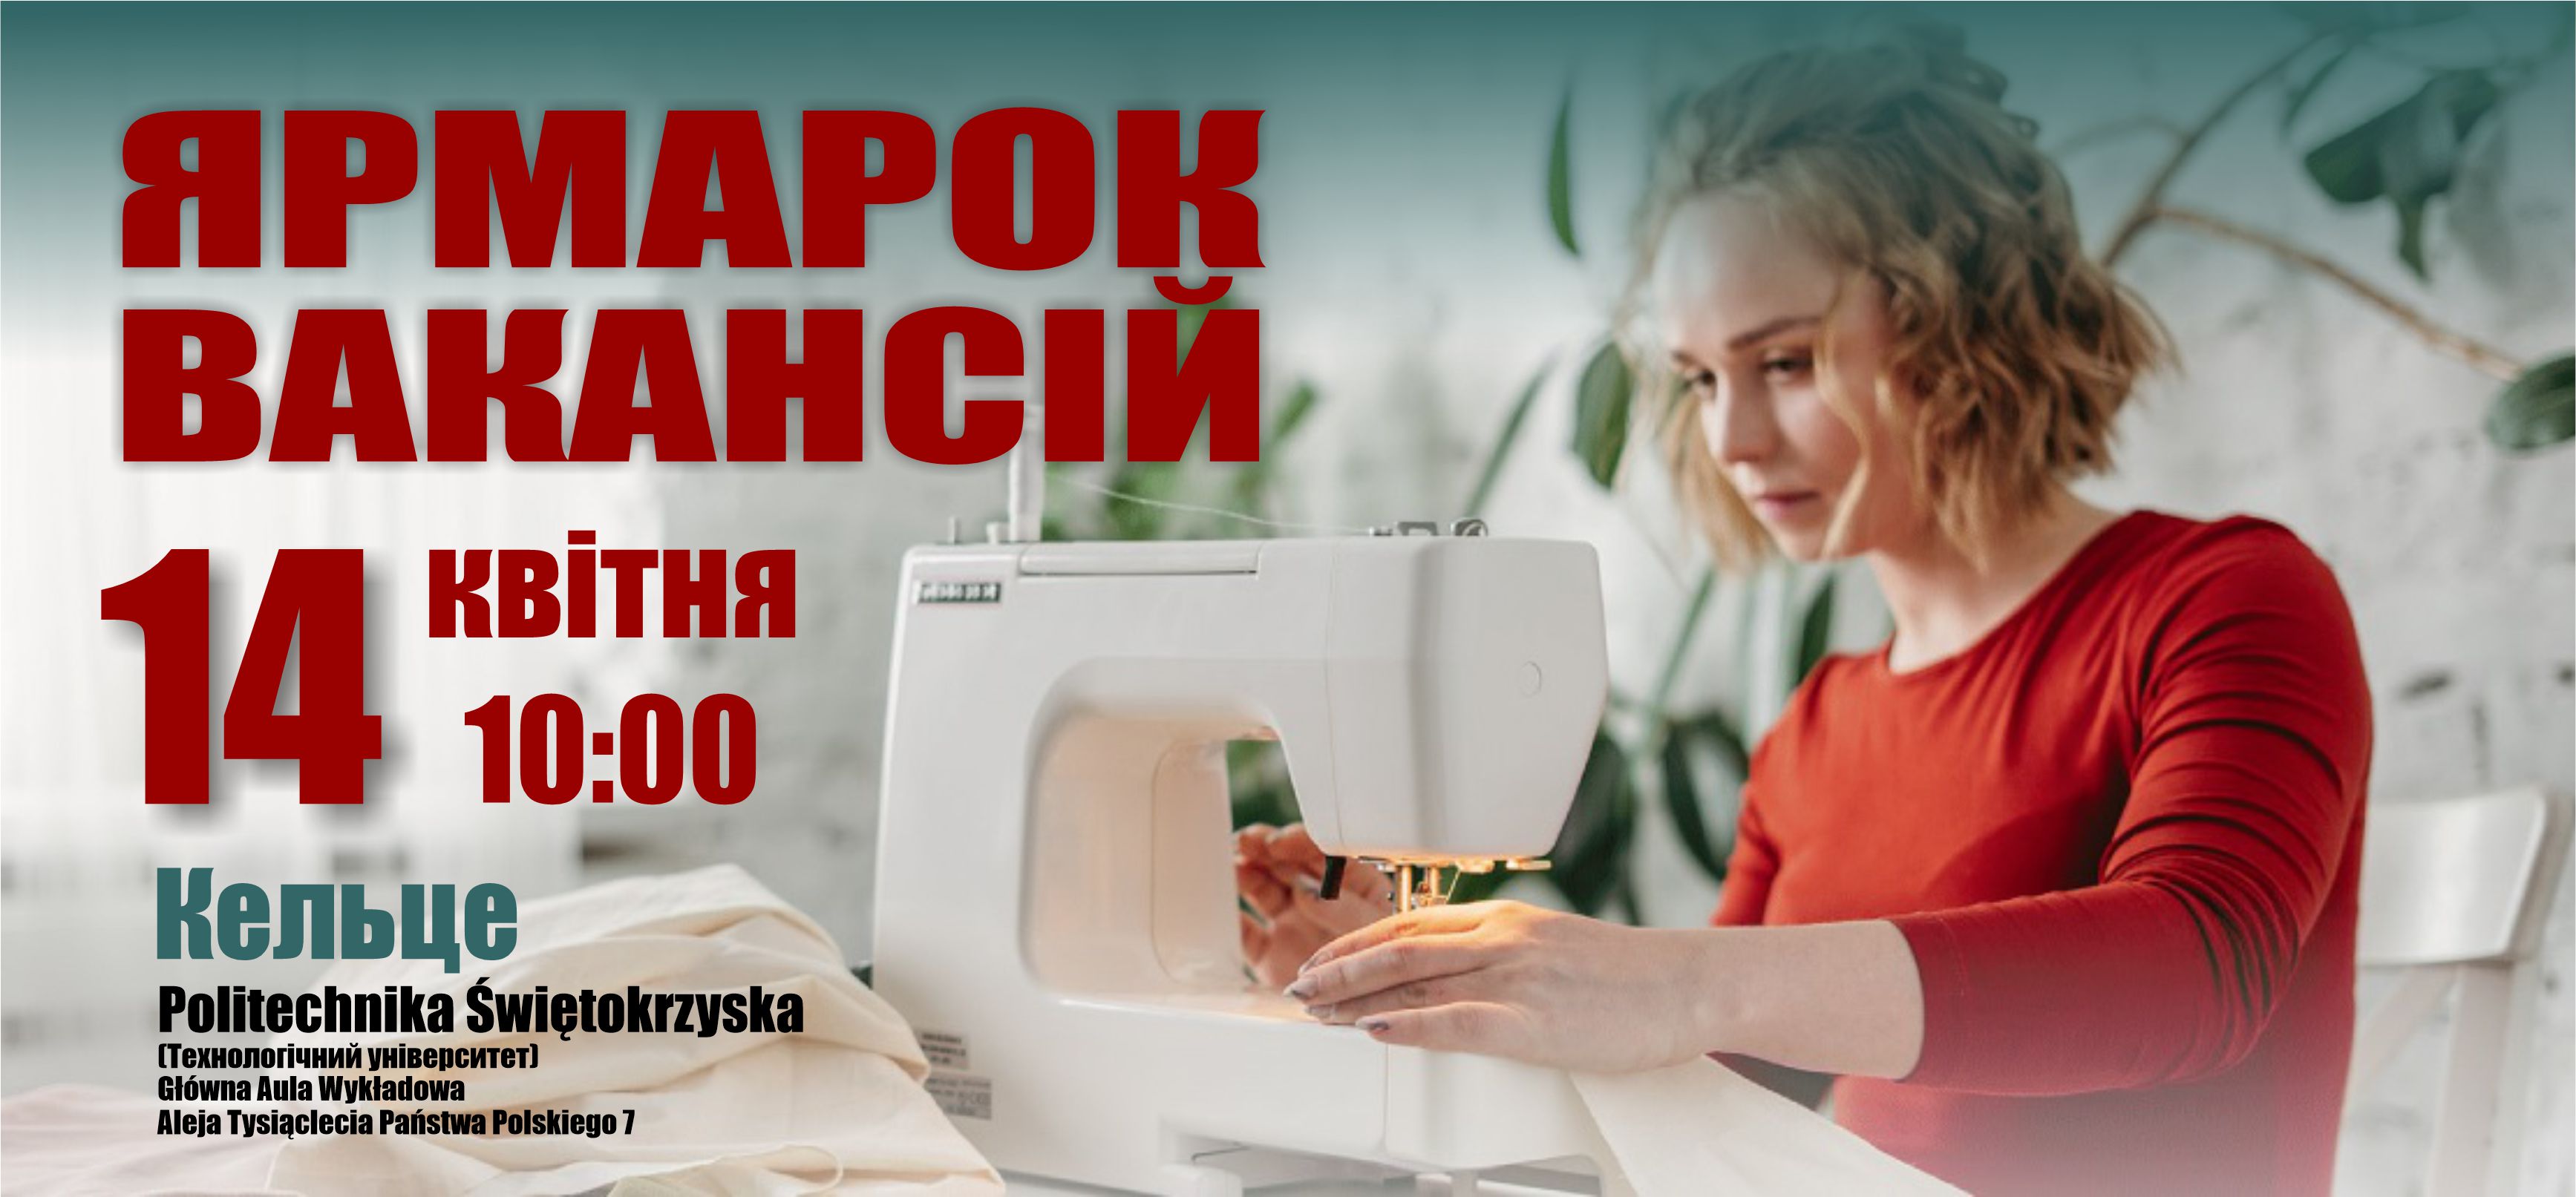 April 14 - Job Fair and the International Conference for Foreigners at the Świętokrzyska University of Technology